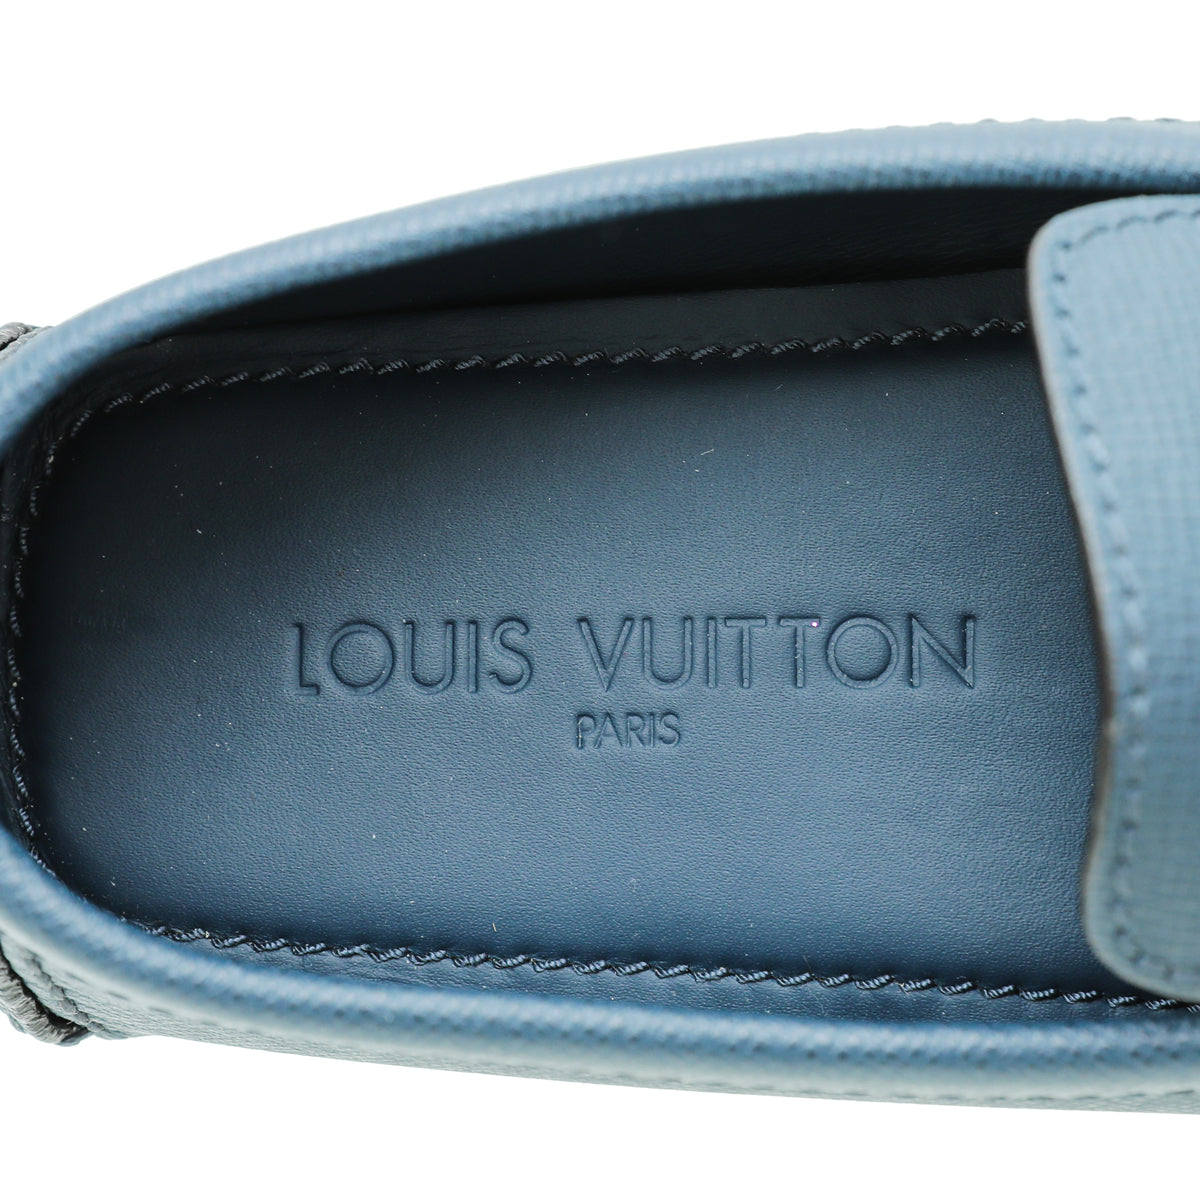 Louis Vuitton moccasins Monte Carlo model in navy grained leather